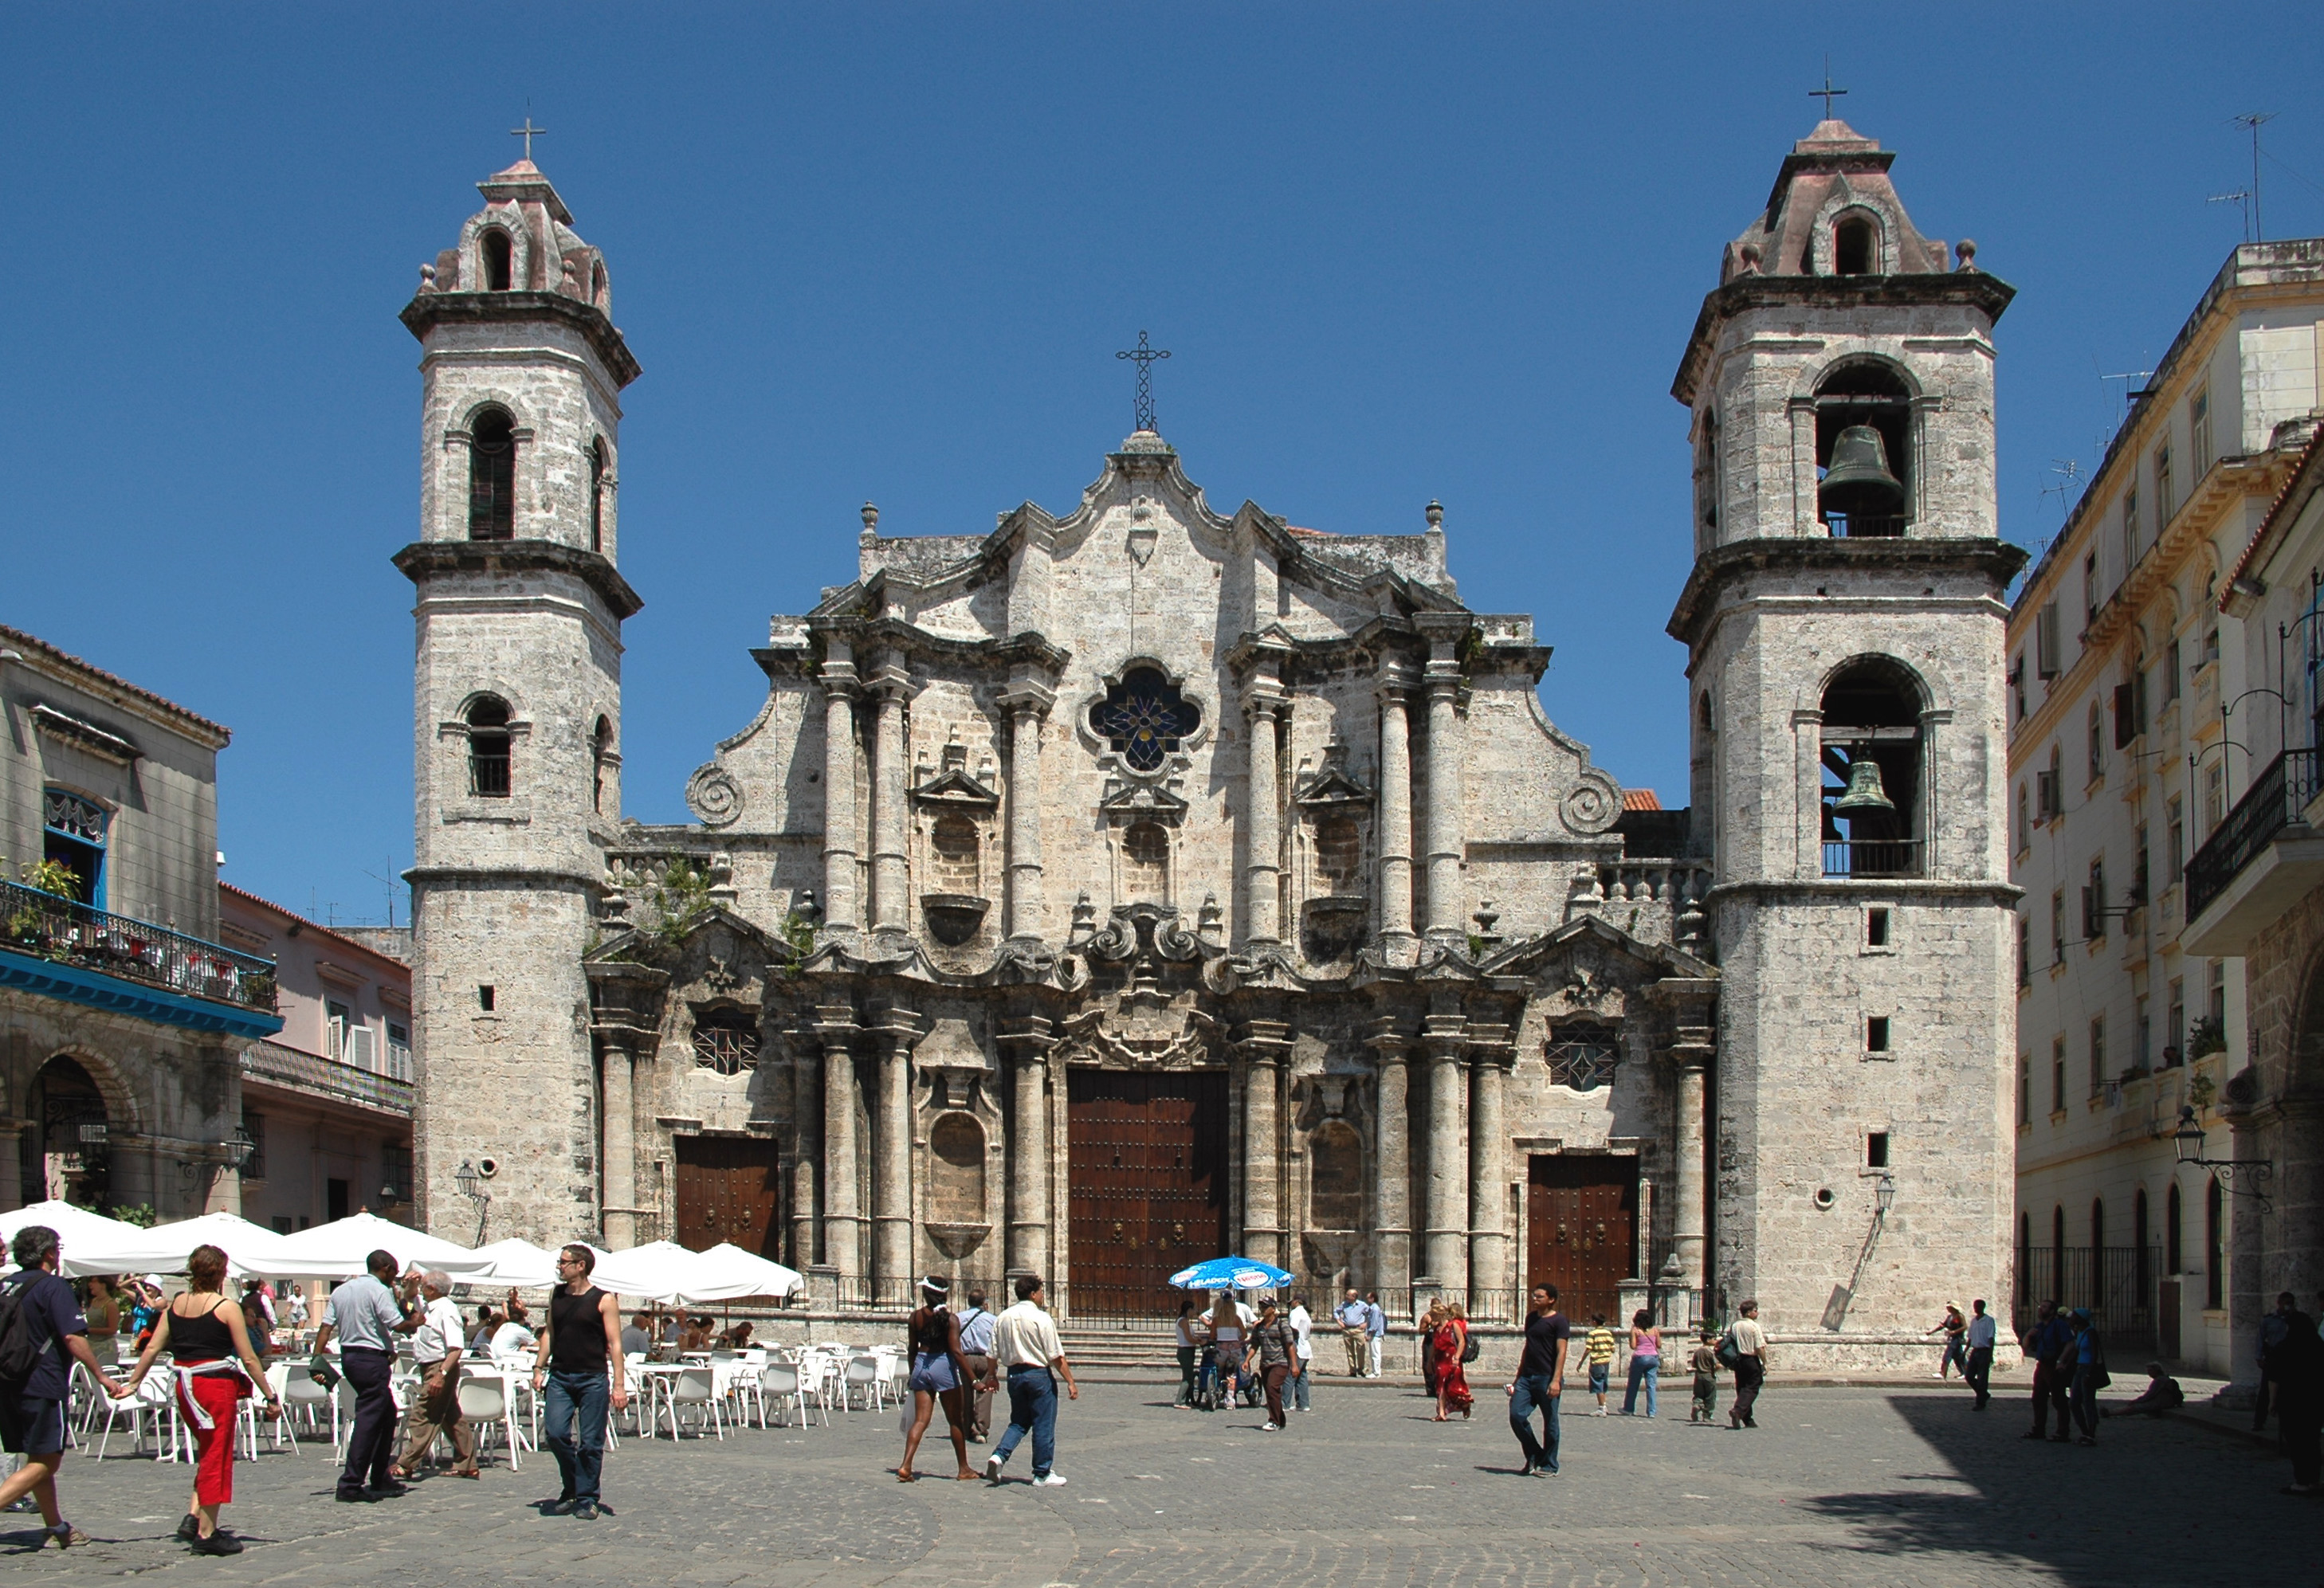 File:Havana Cathedral and Square (Jan 2014).jpg - Wikimedia Commons